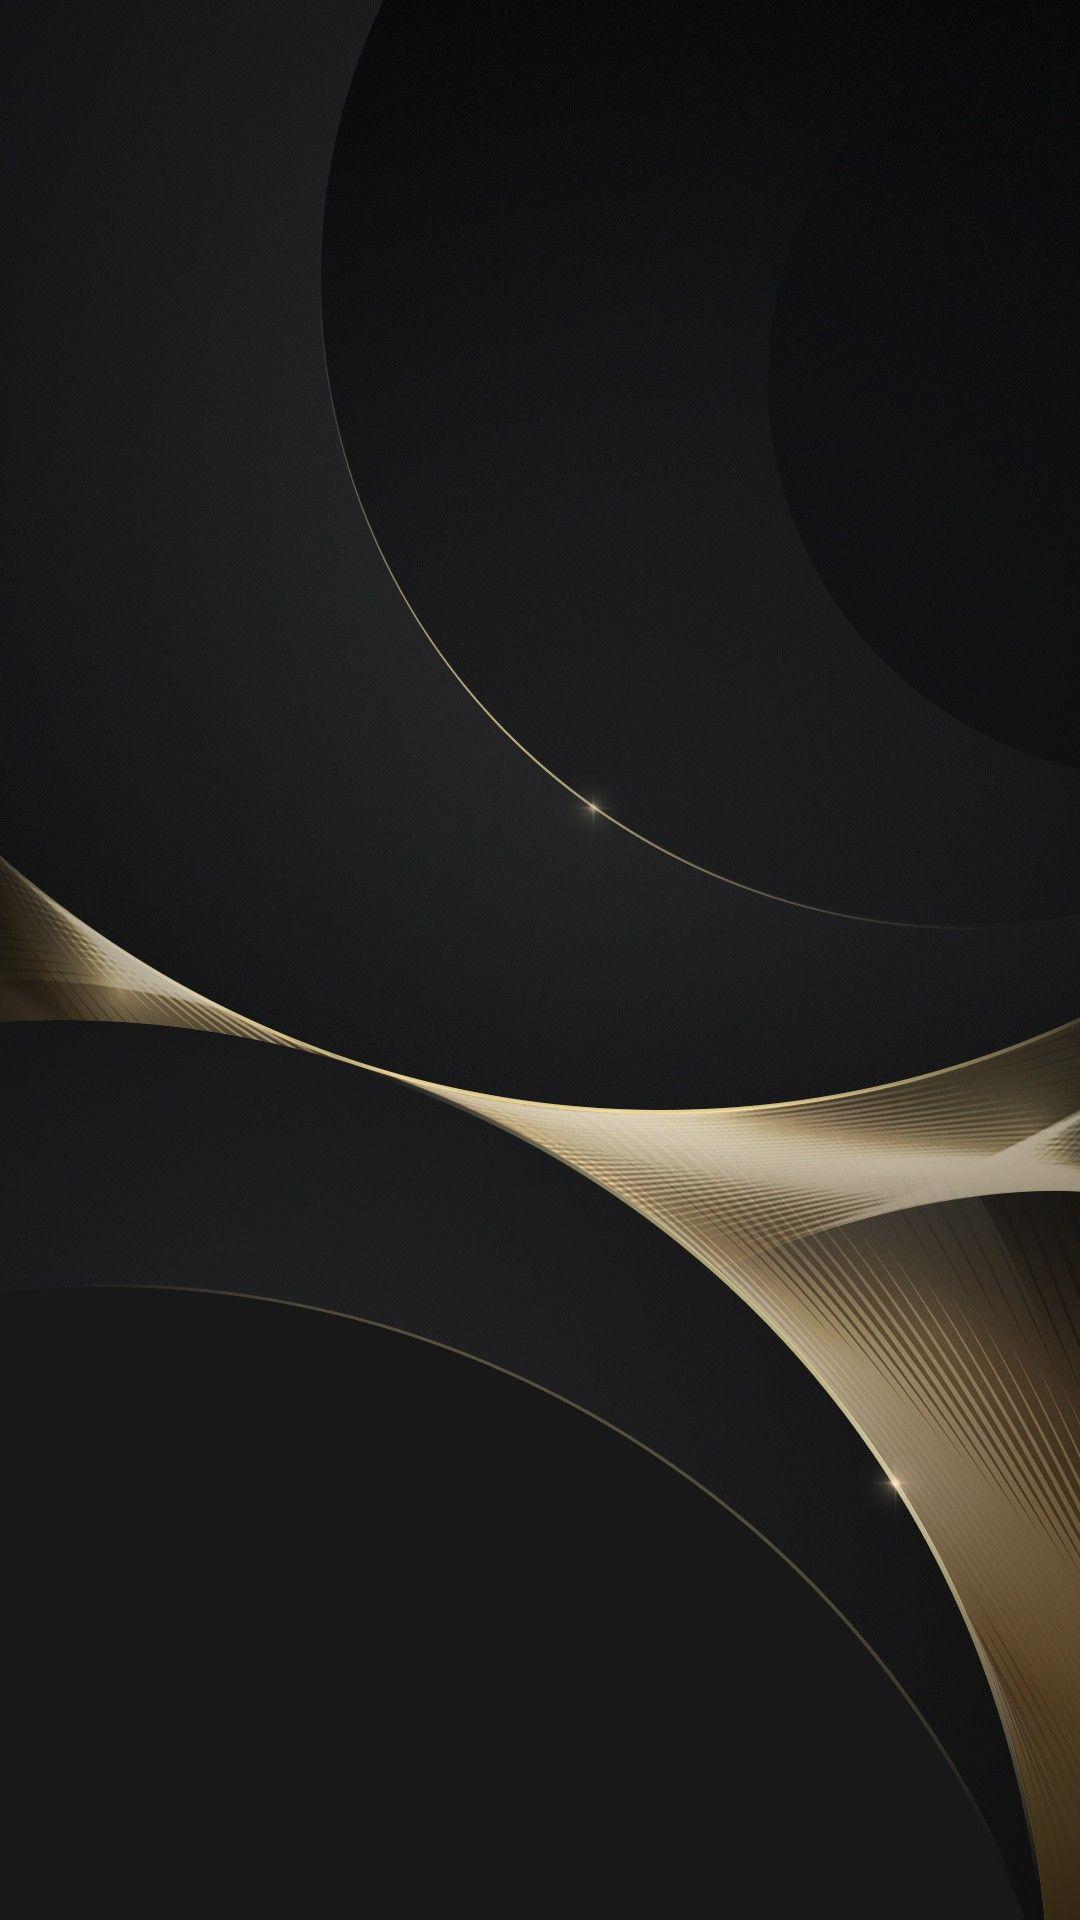 Black and Gold Wallpaper. Android wallpaper black, Gold